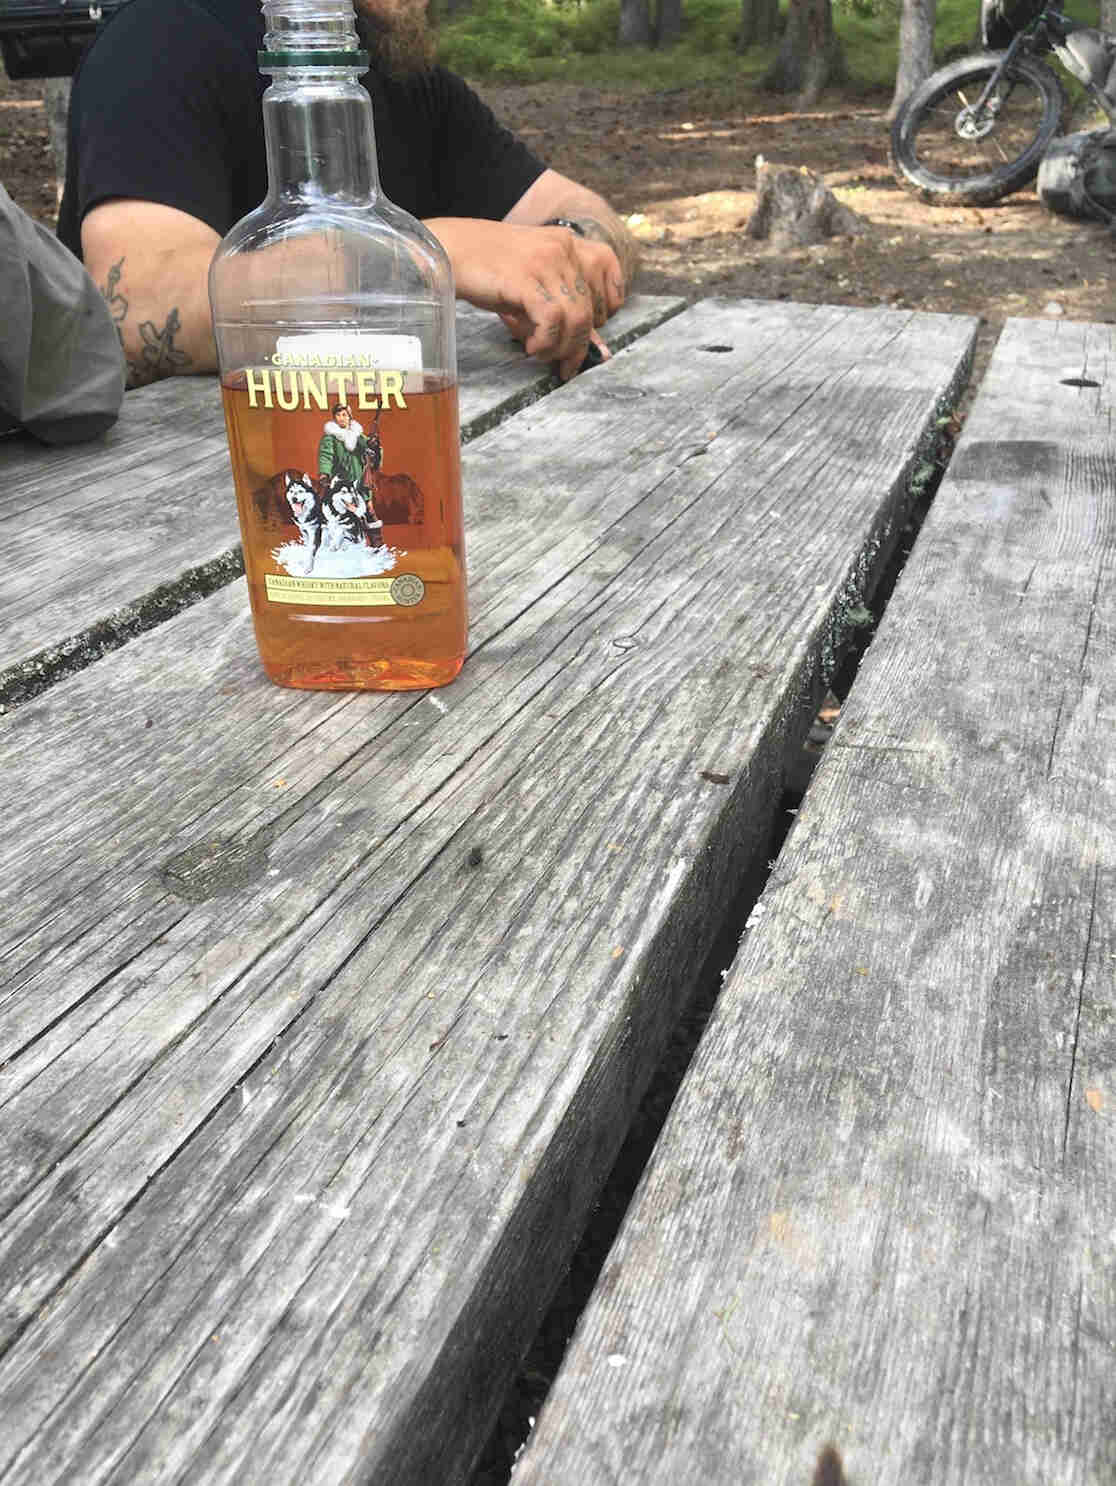 A bottle of Hunter liquors, on a picnic table, with a person sitting at the left end